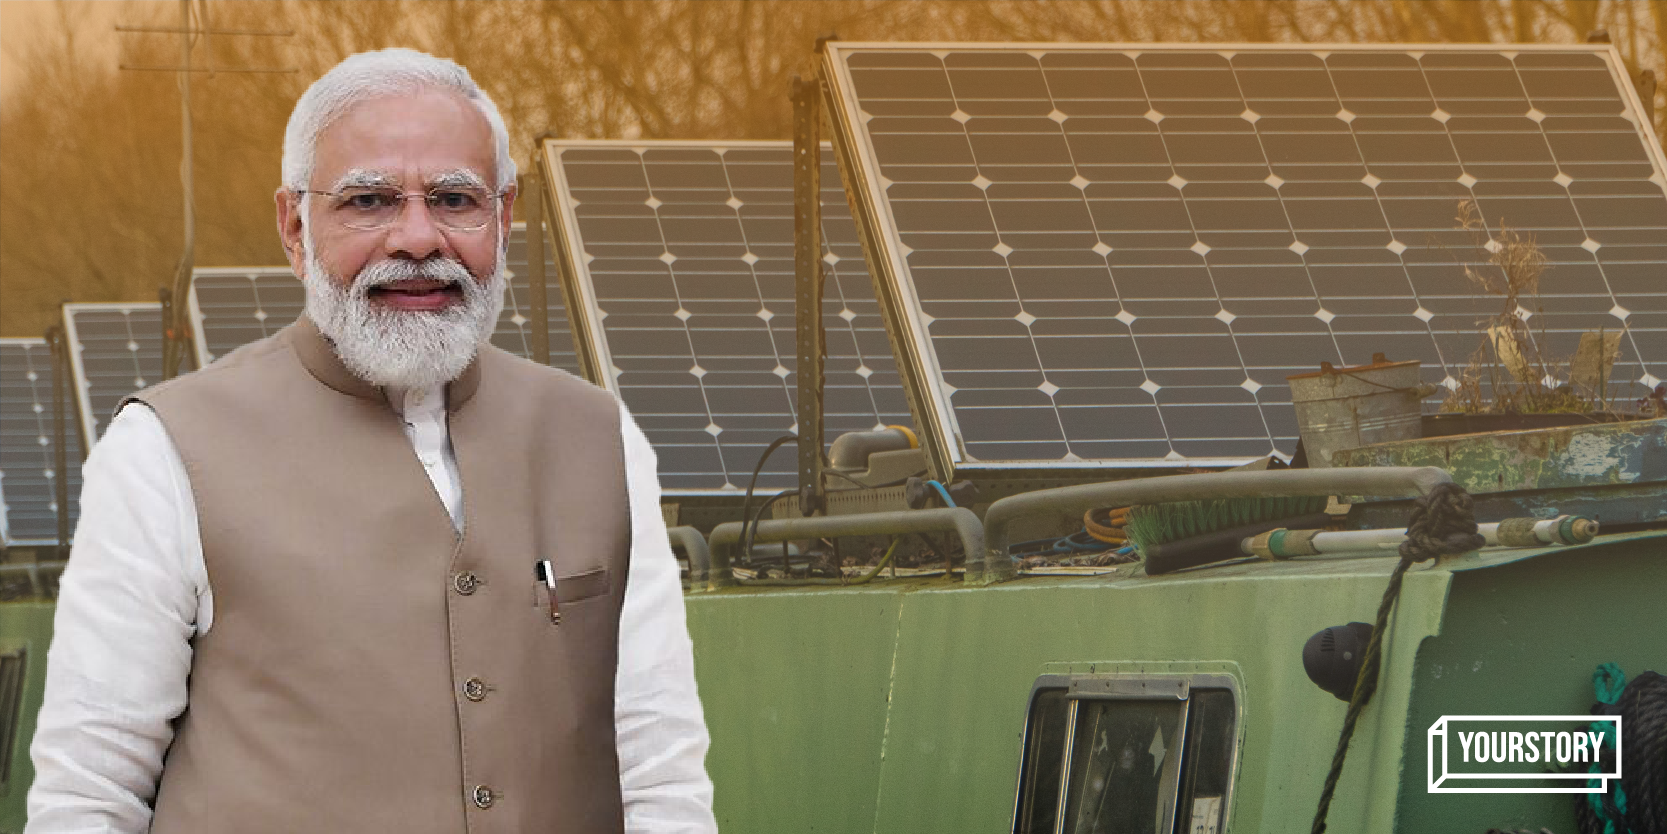 Make electricity while the sun shines: India’s solar rooftop ambitions